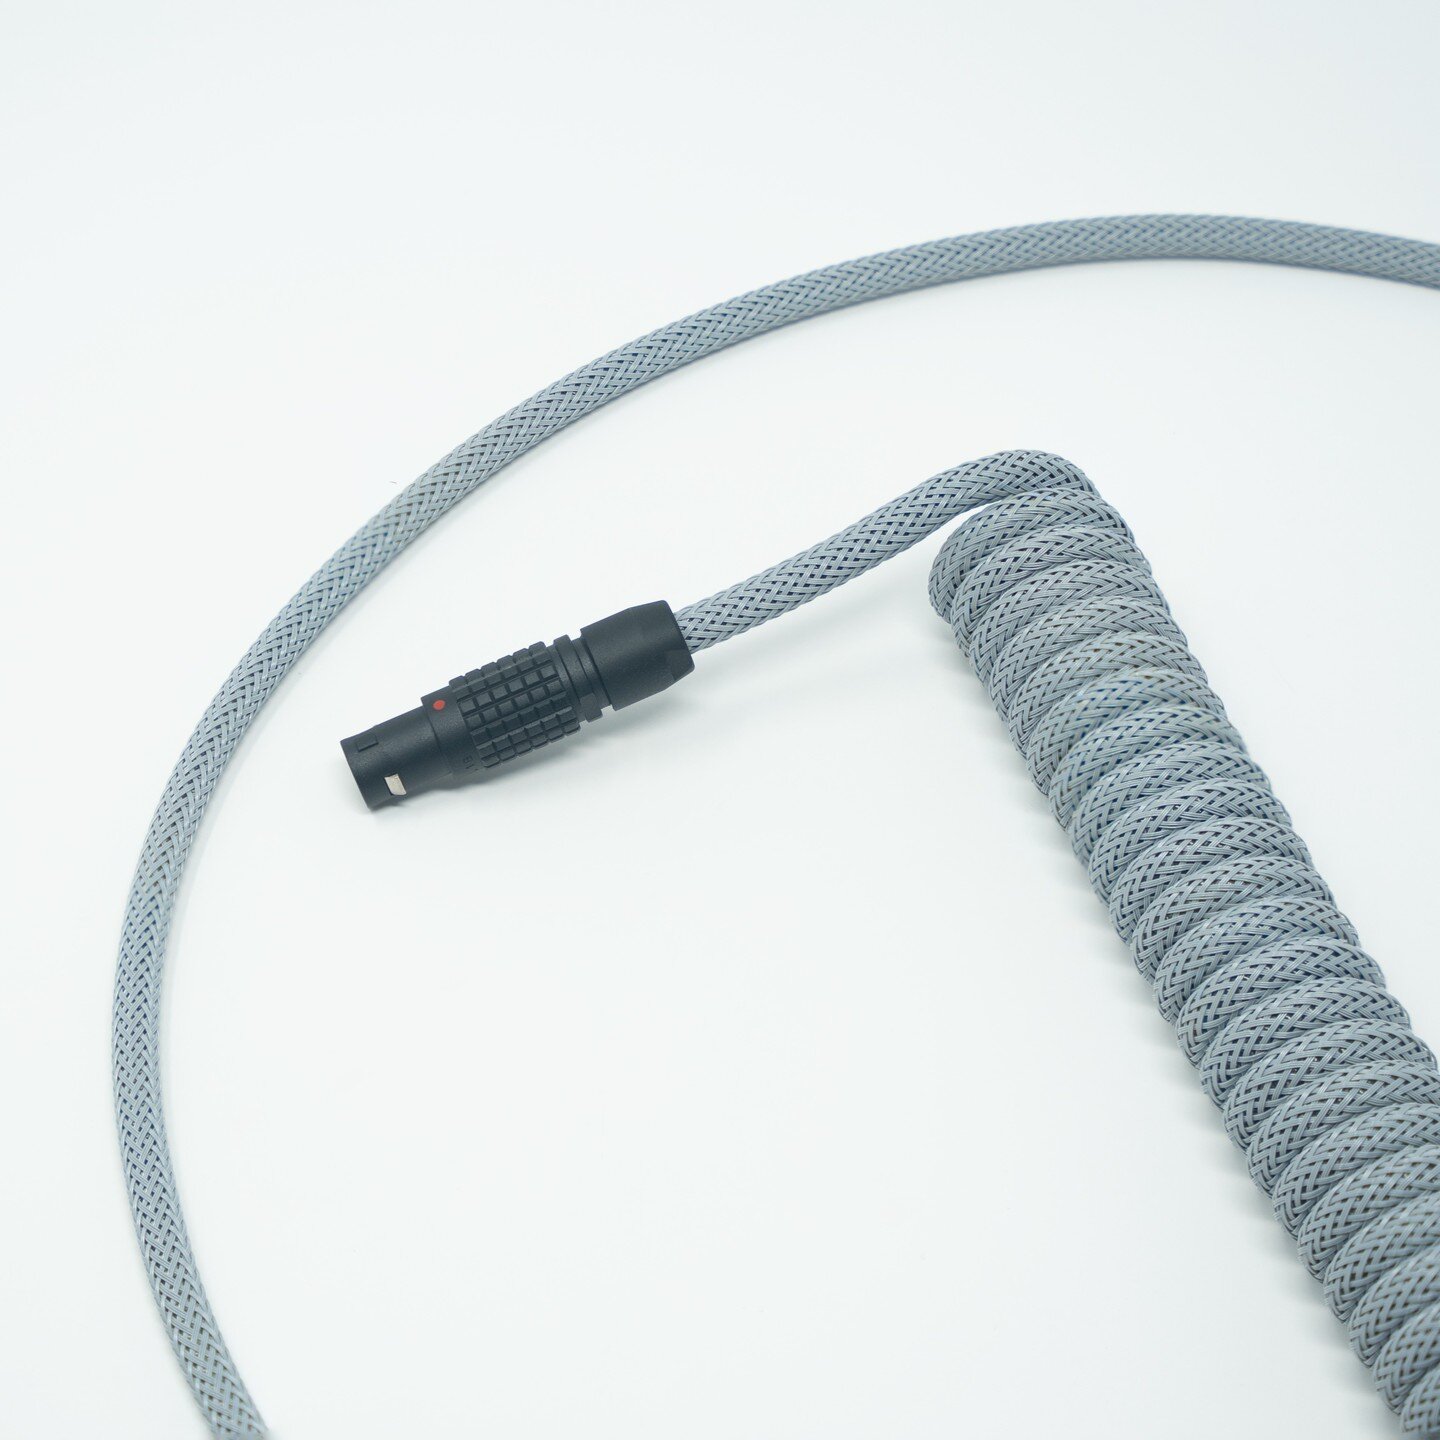 Another one ... 

Another fantastic classic cable rocking a charcoal base para and fabulously saturated Aluminum Grey MDPC-X.

It's almost silly to refer to a monochrome shade as &quot;saturated&quot; but paired with that black 1B (larger) genuine LE